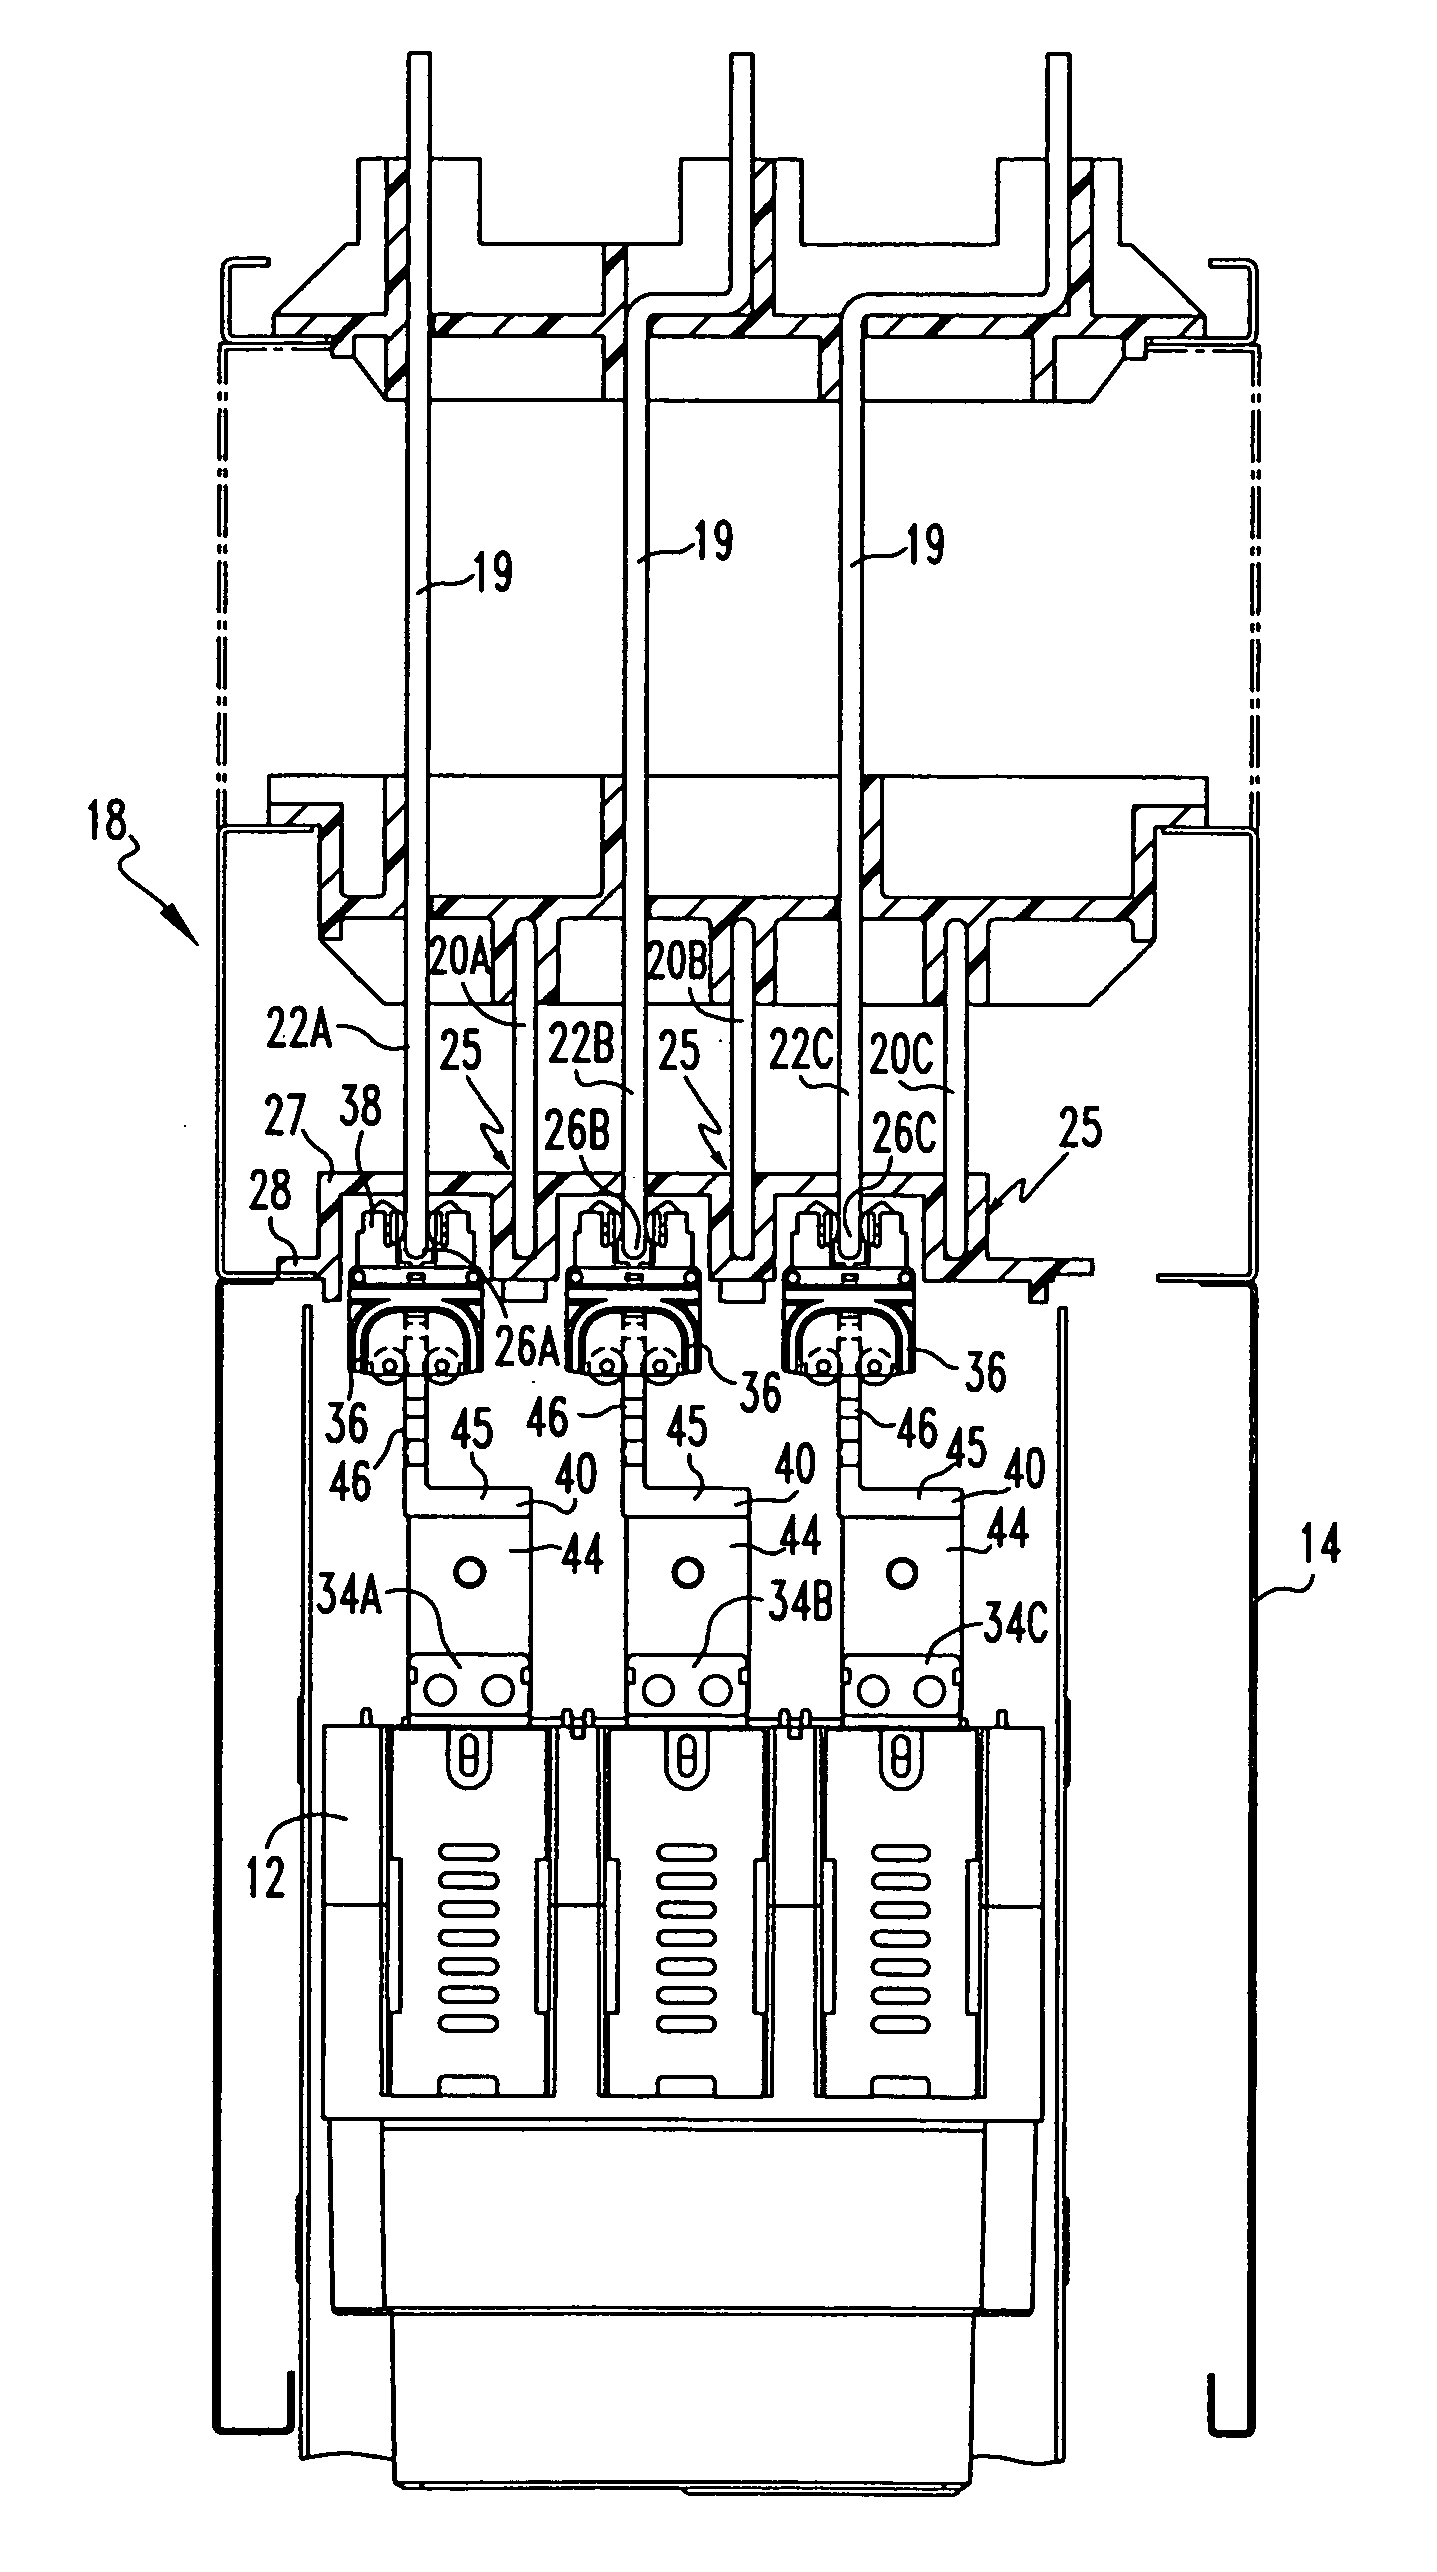 Power circuit breakers with offset vertical quick disconnect adapters to allow plugging onto a line and a load bus in different planes